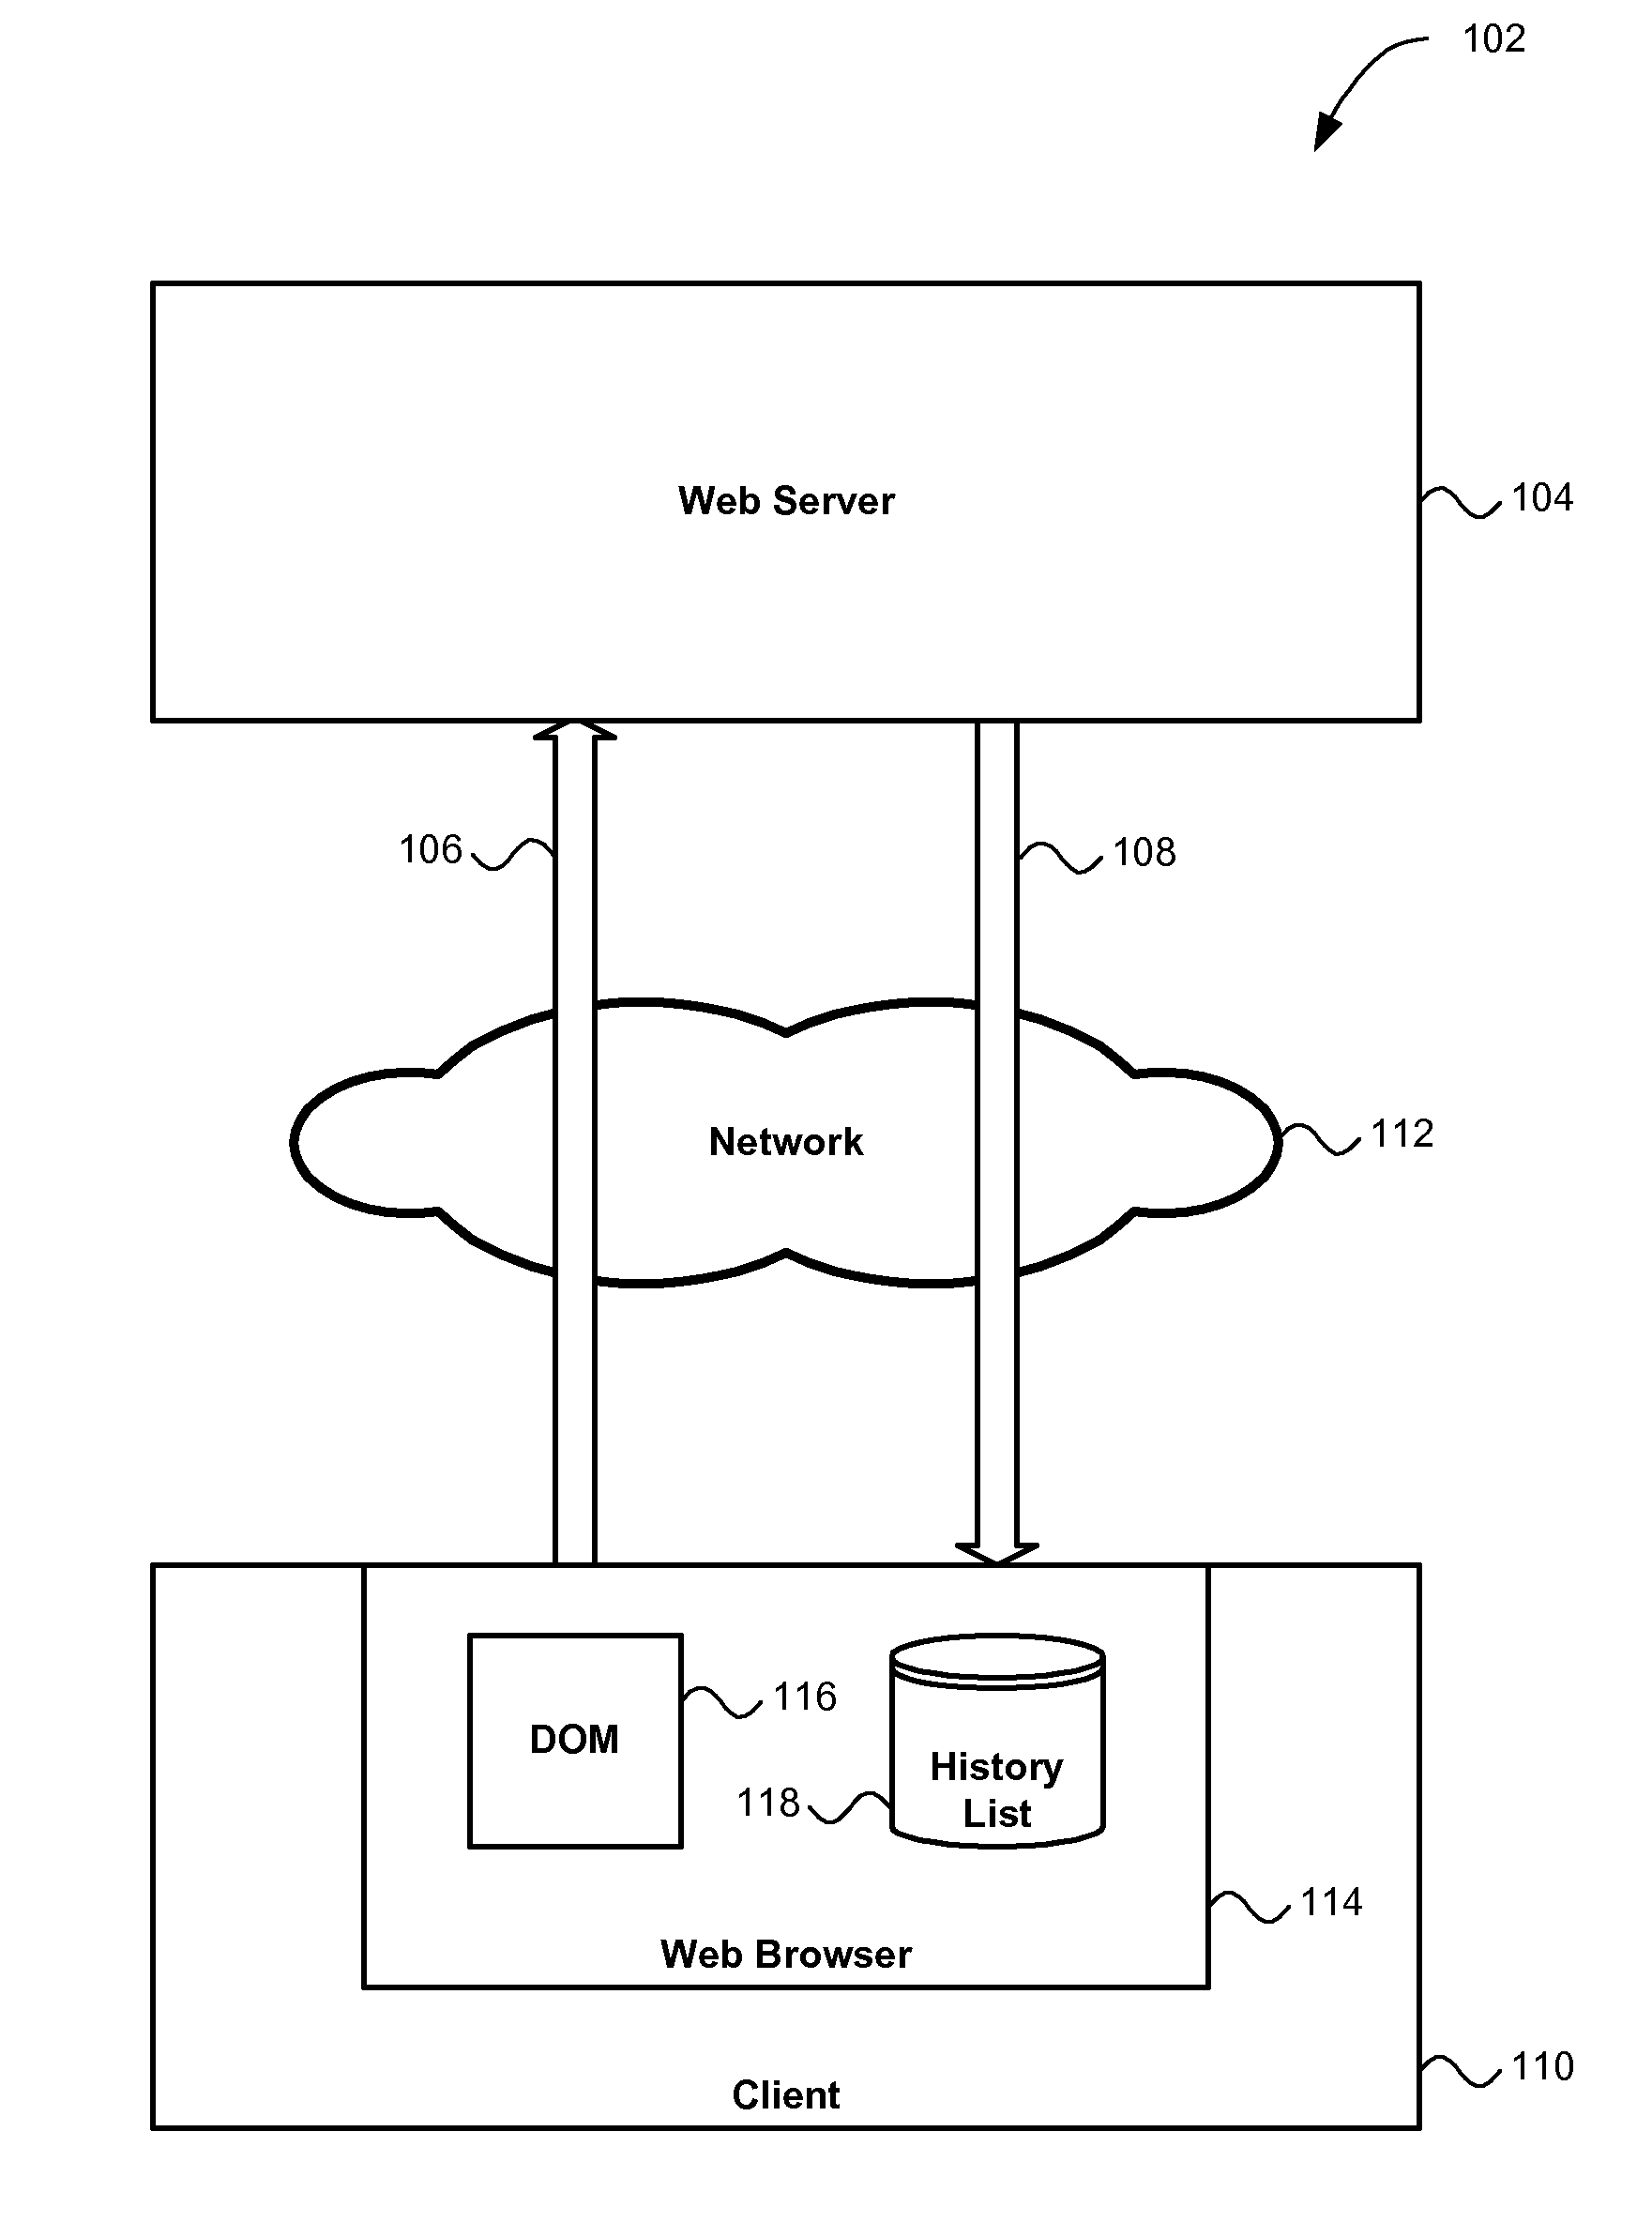 Method for enabling discrete back/forward actions within a dynamic web application